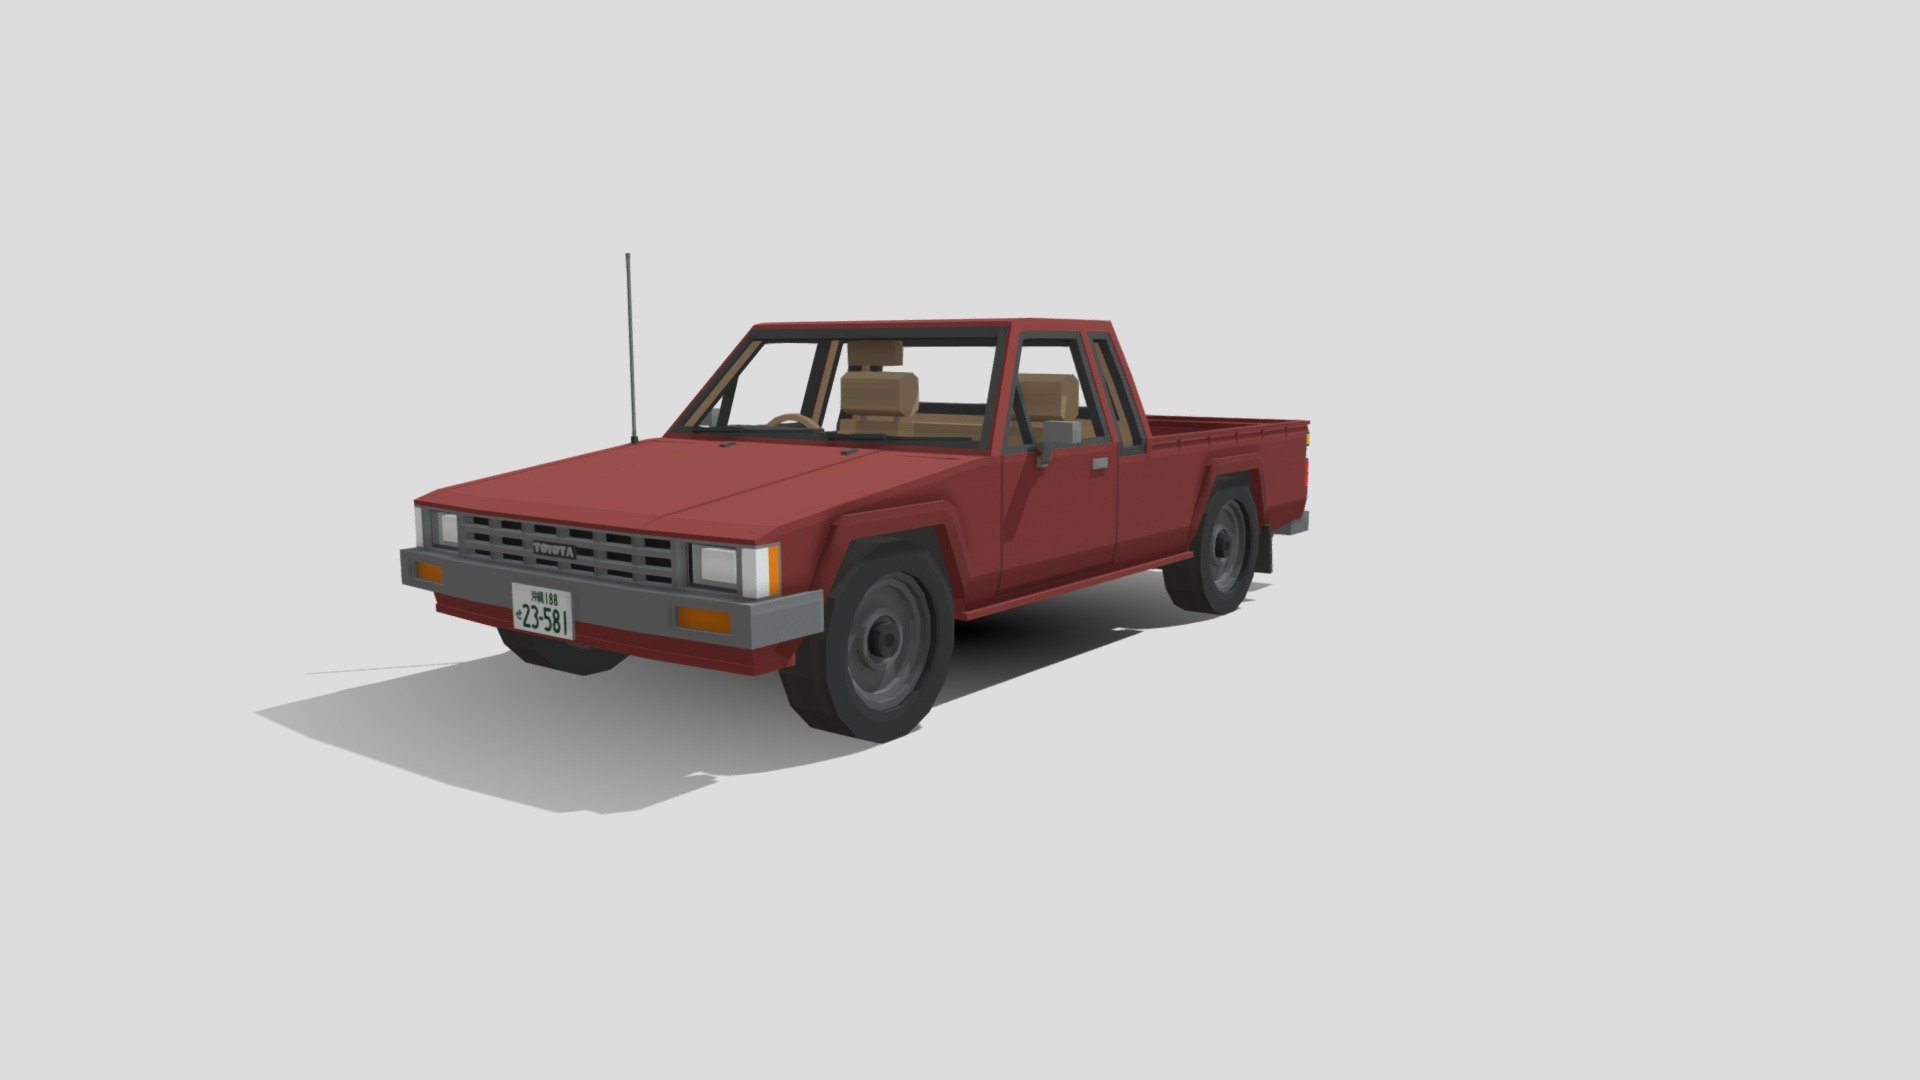 Replica of a 4th gen. Toyota Hilux for Minecraft: Bedrock Edition, as suggested by PalmaGamer. To be used for my MCPE addon to be posted on MCPEDL 3d model